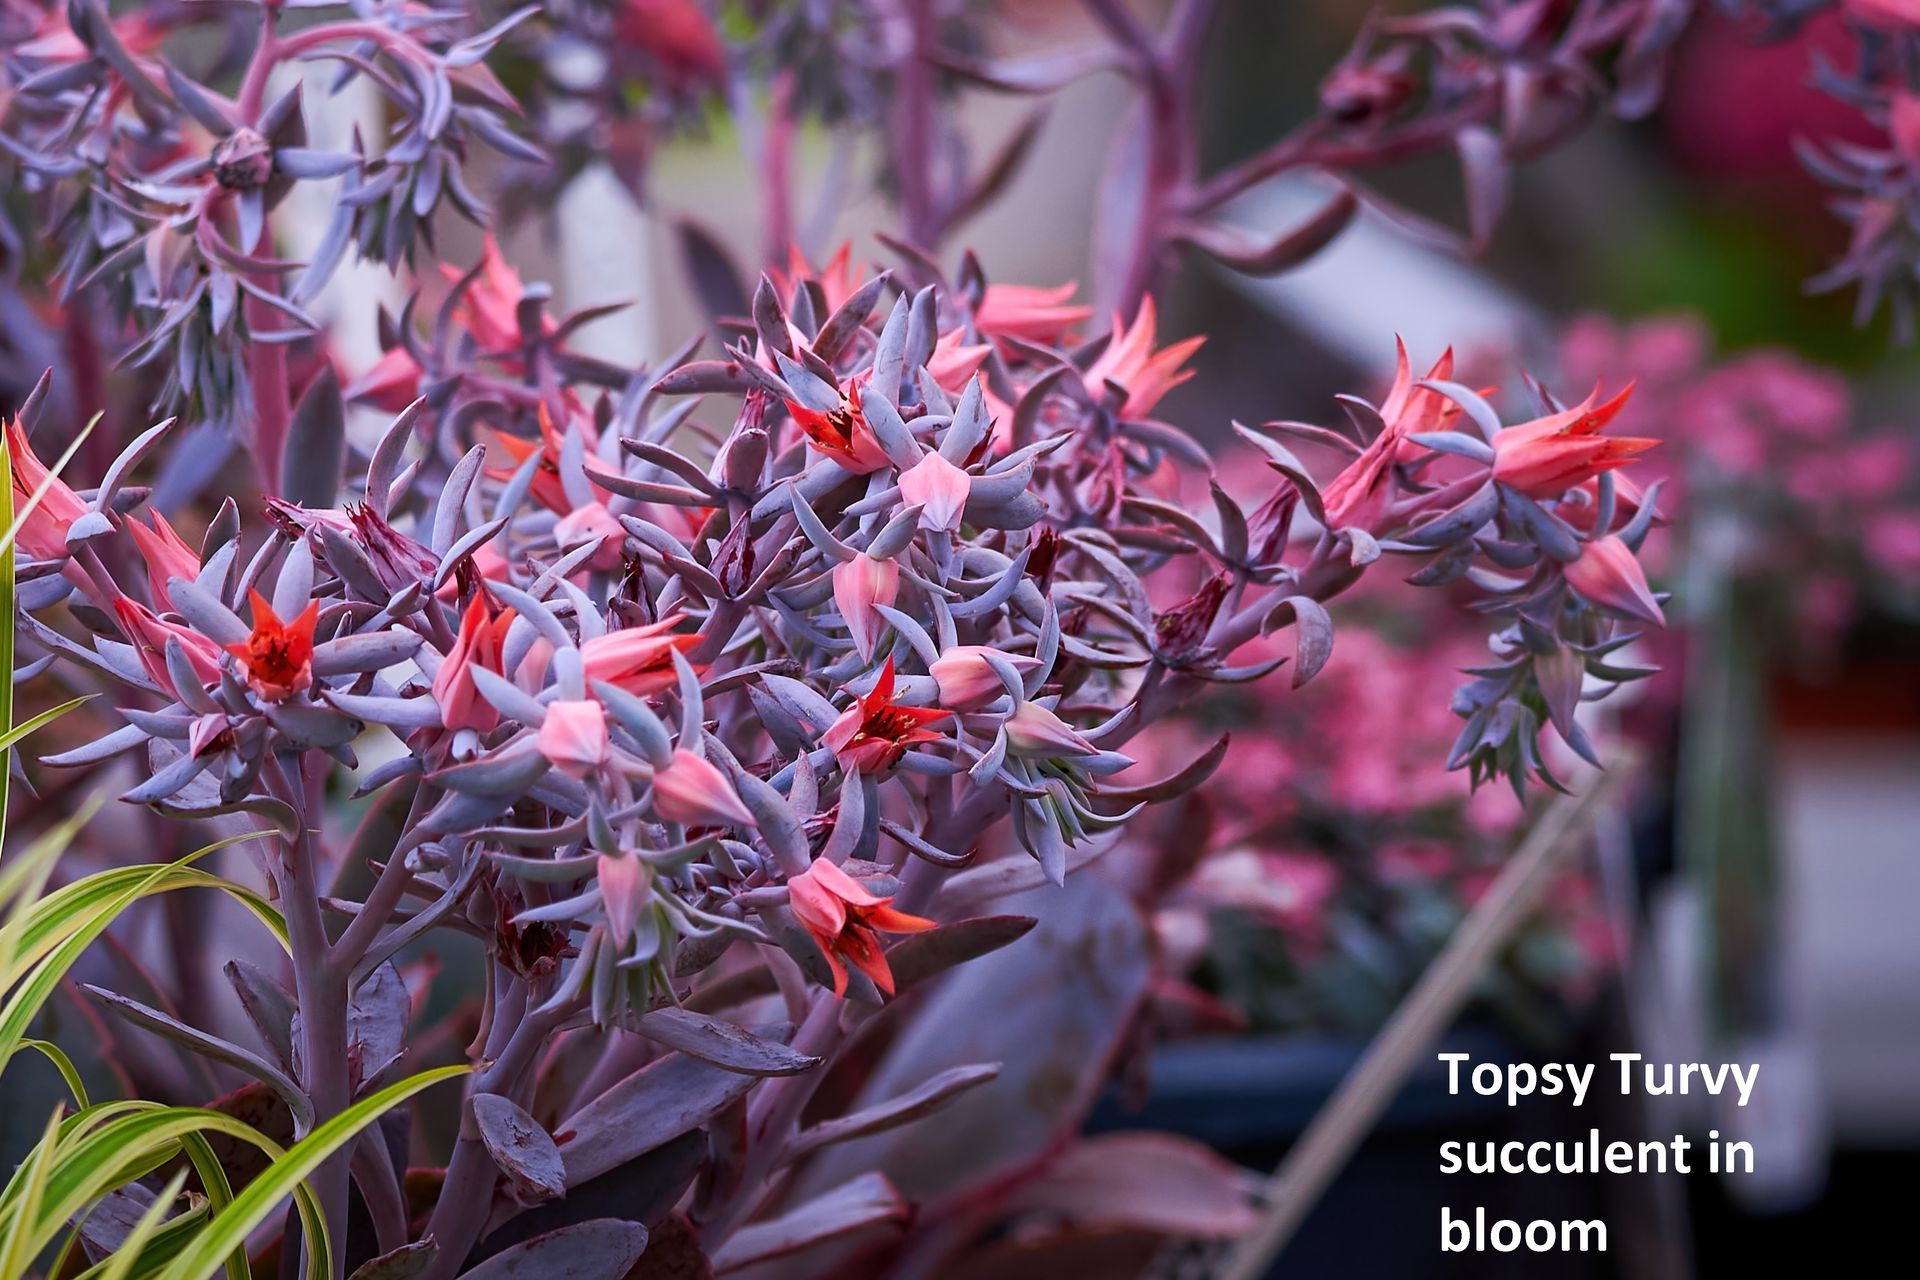 Orange, pink, and silver colors of the Topsy Turvy succulent blooming